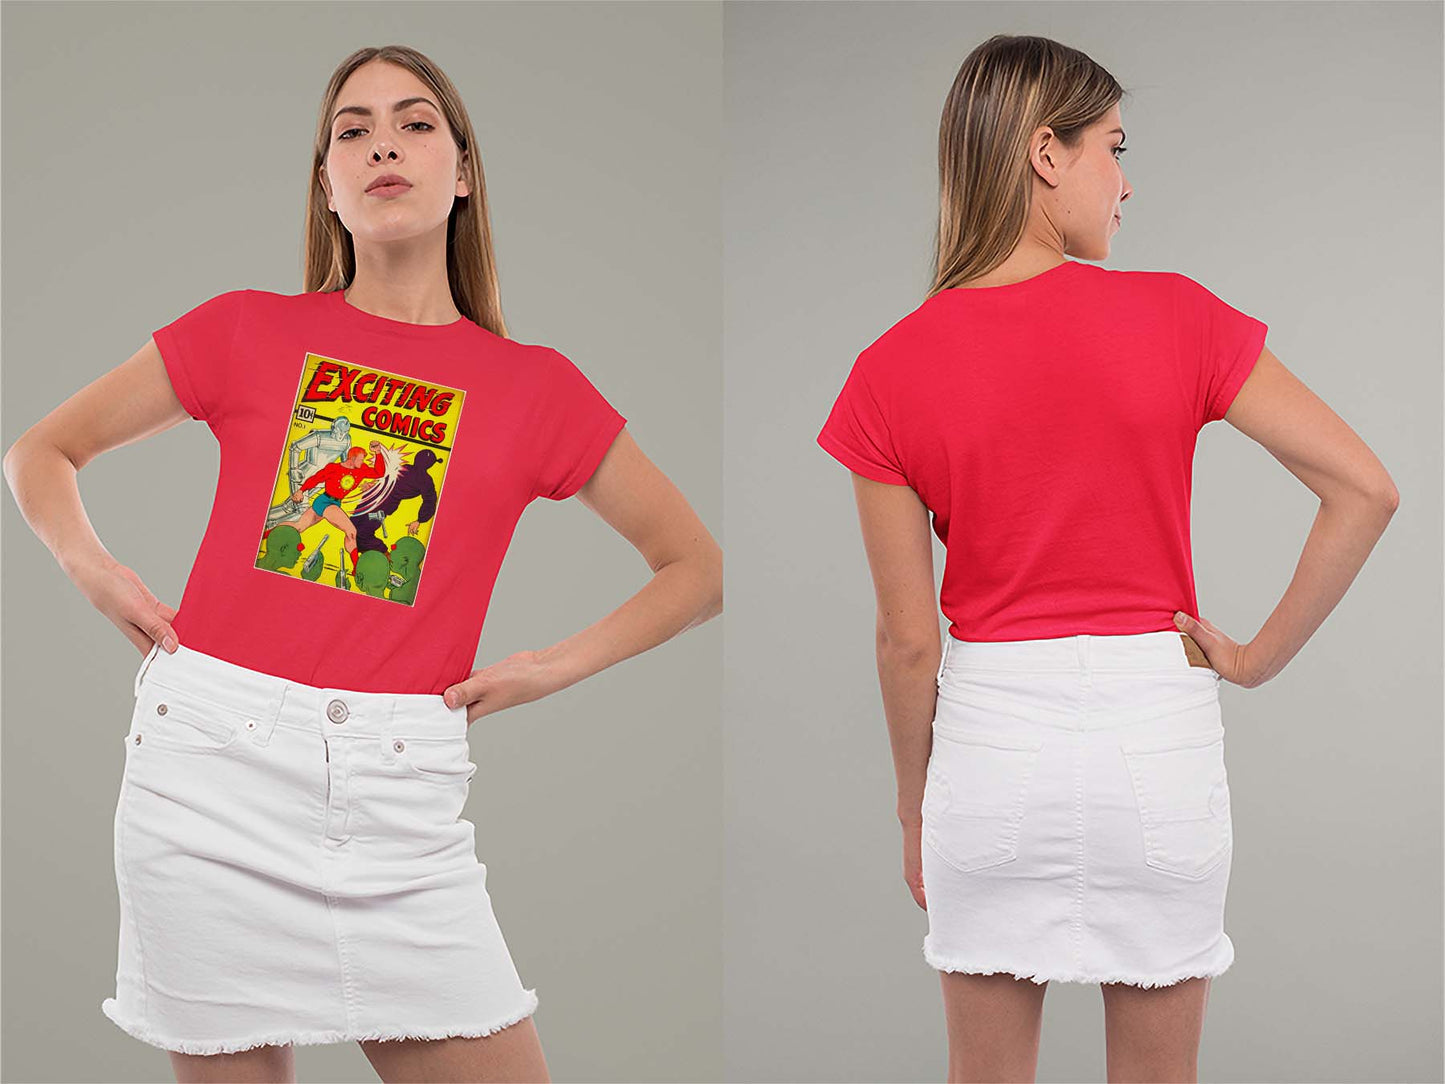 Exciting Comics No.1 Ladies Crew (Round) Neck Shirt Small Red